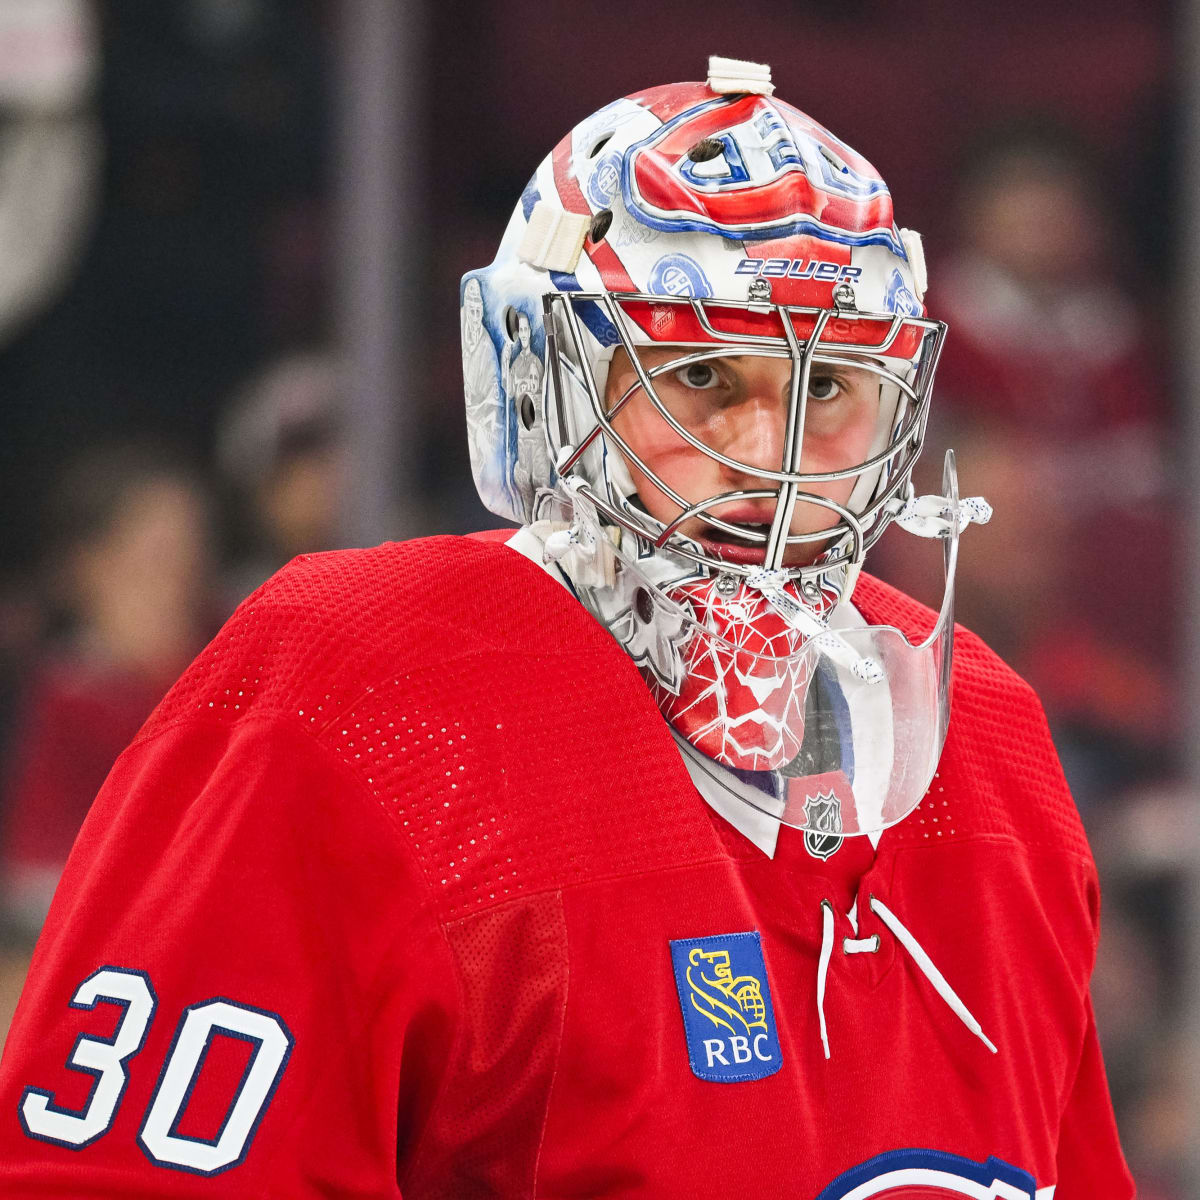 Martin Biron Stats and Player Profile